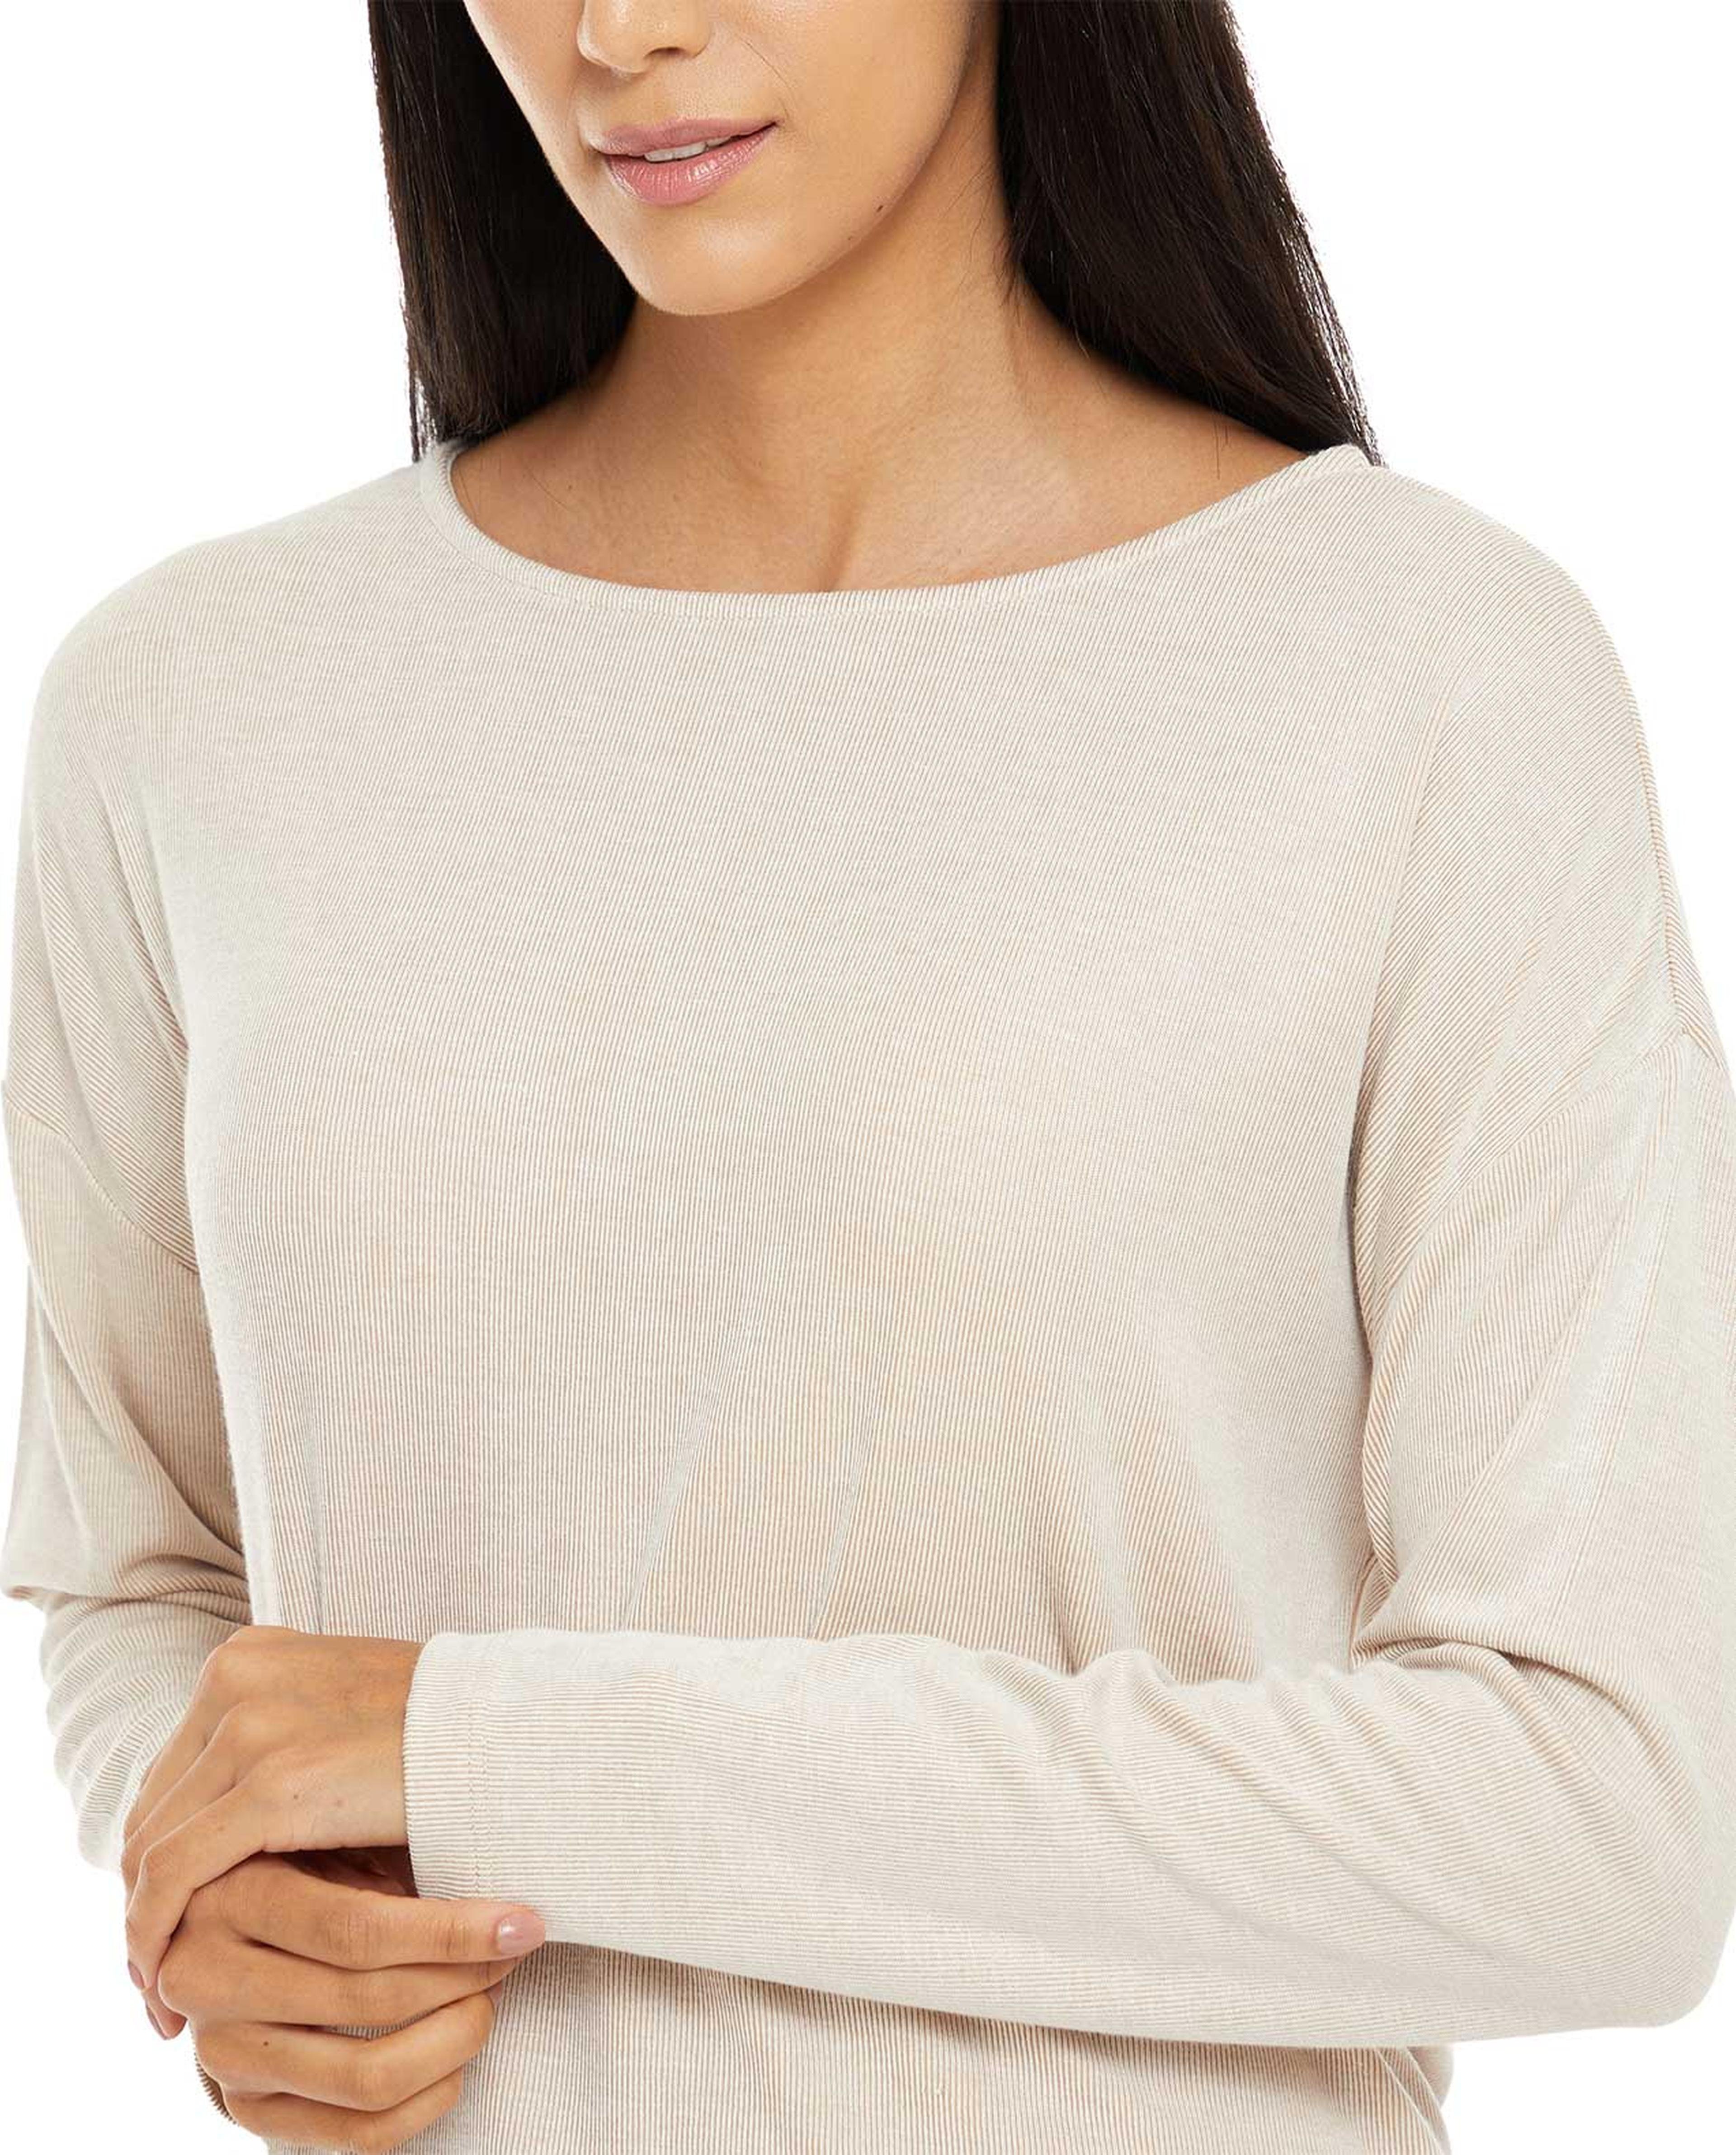 Solid Sleep Top with Round Neck and Long Sleeves